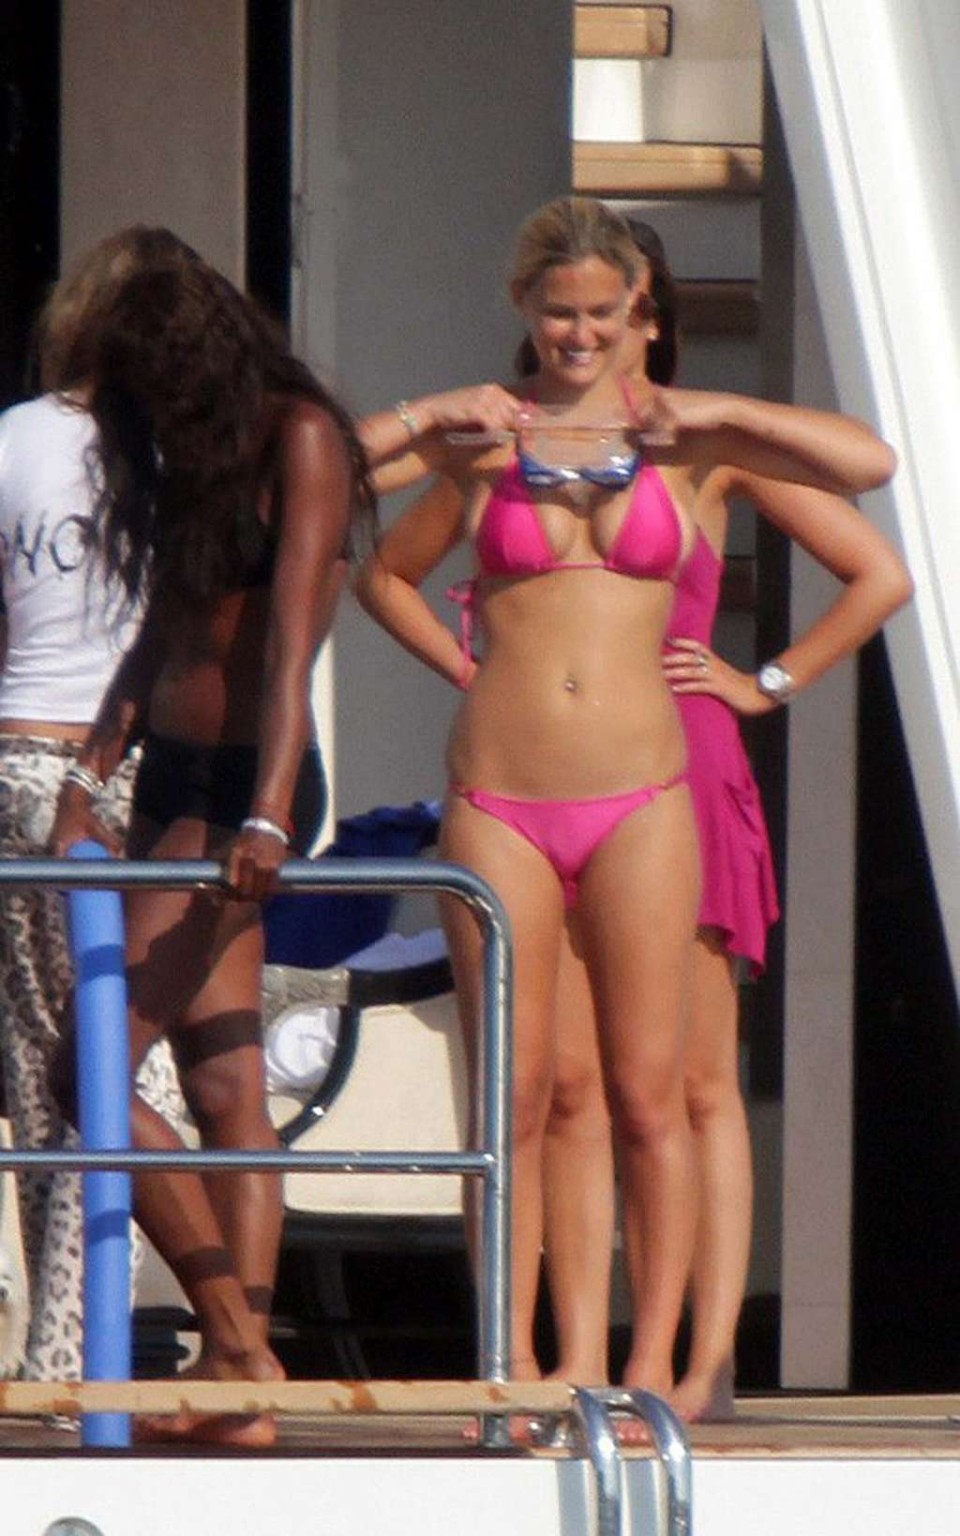 Bar Refaeli looking very sexy in red bikini on yacht paparazzi pictures #75336818